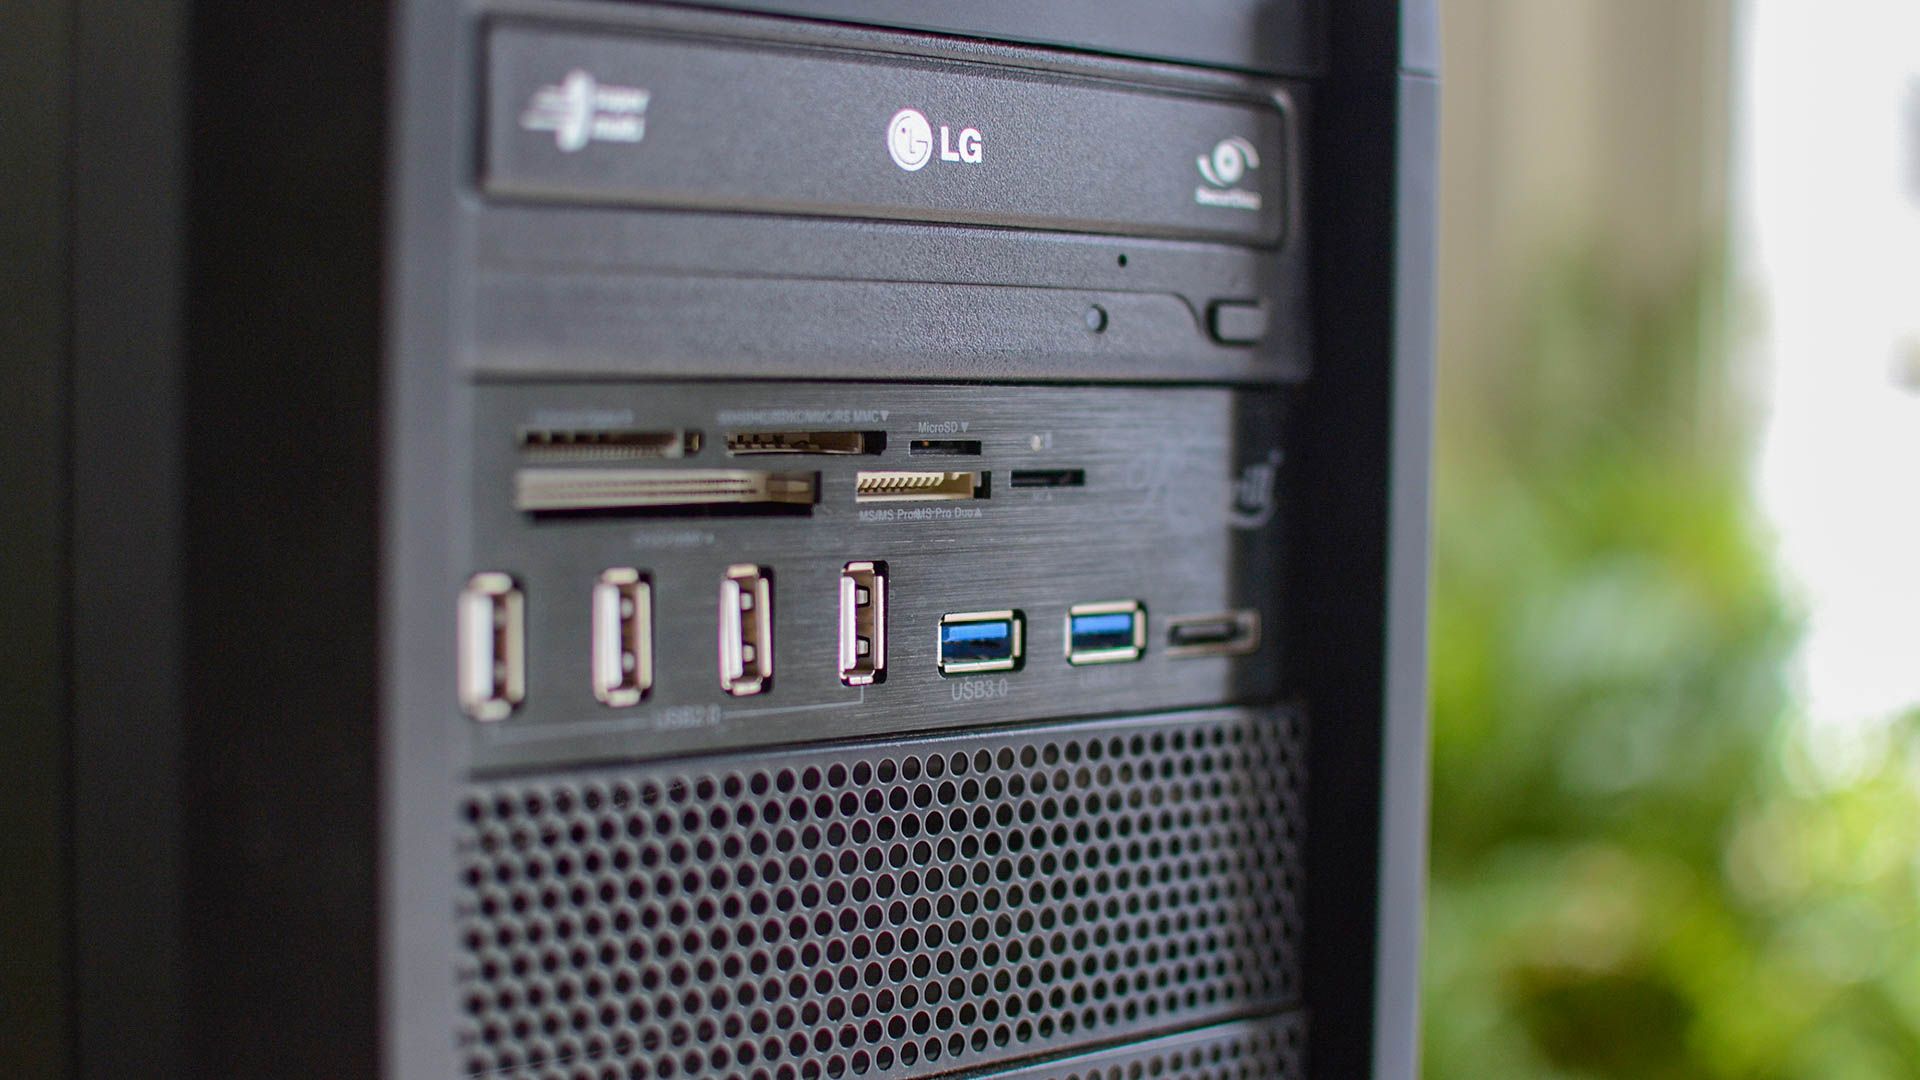 USB ports on the front of a PC tower. 